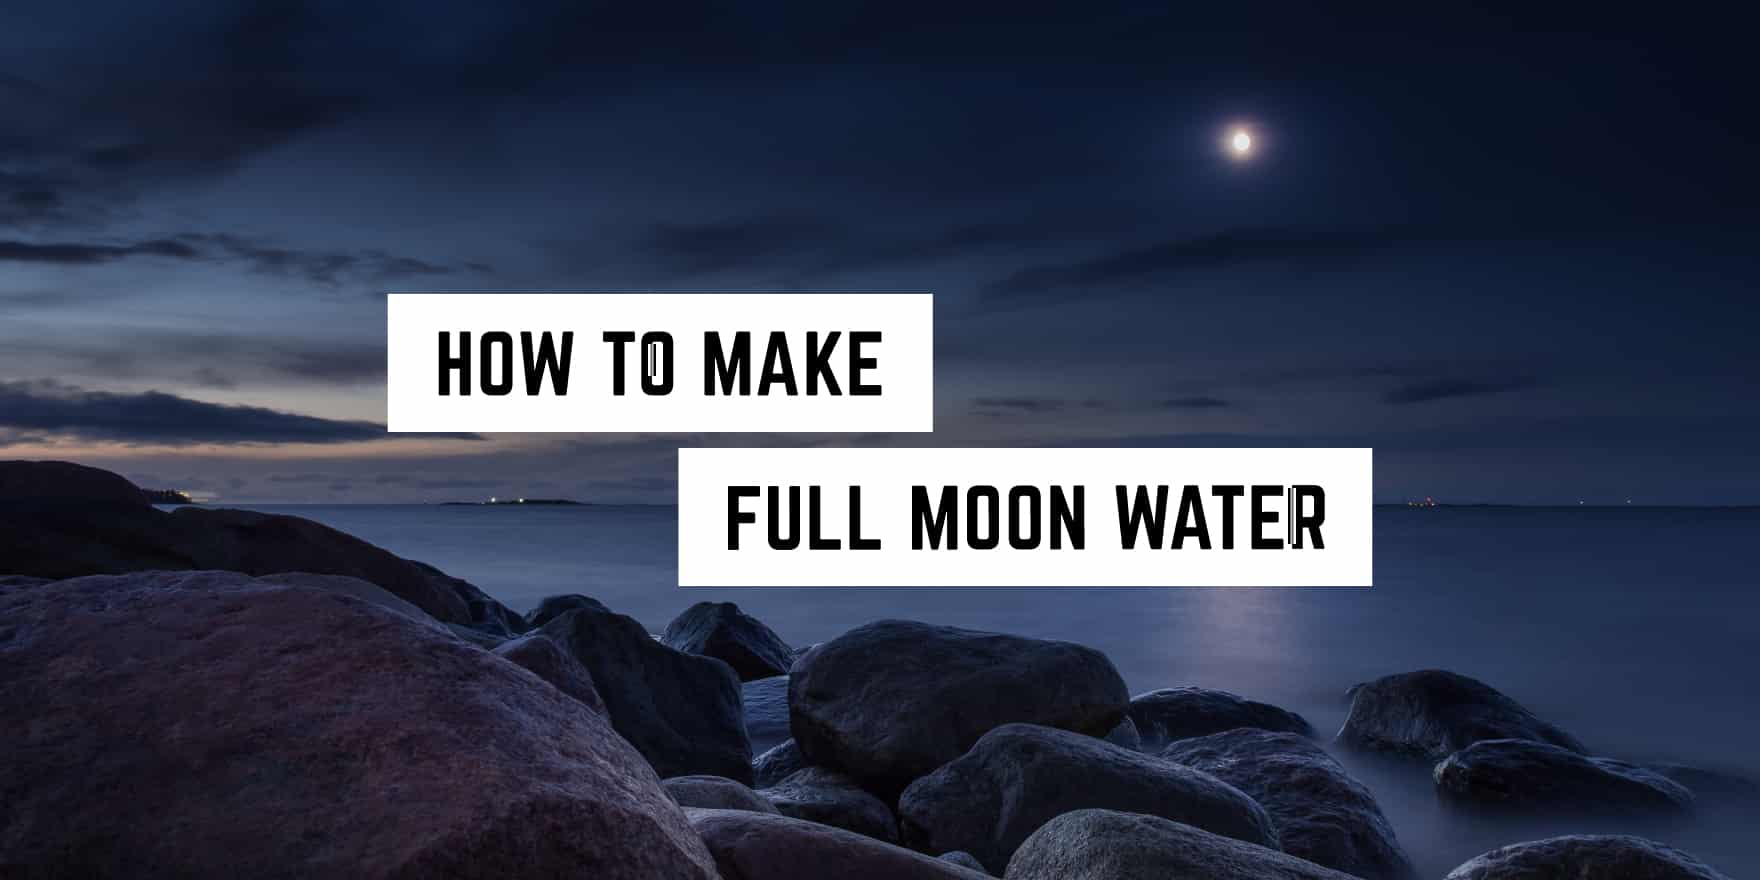 A tranquil nighttime seascape with text overlay about making full moon water, a spiritual new age product.